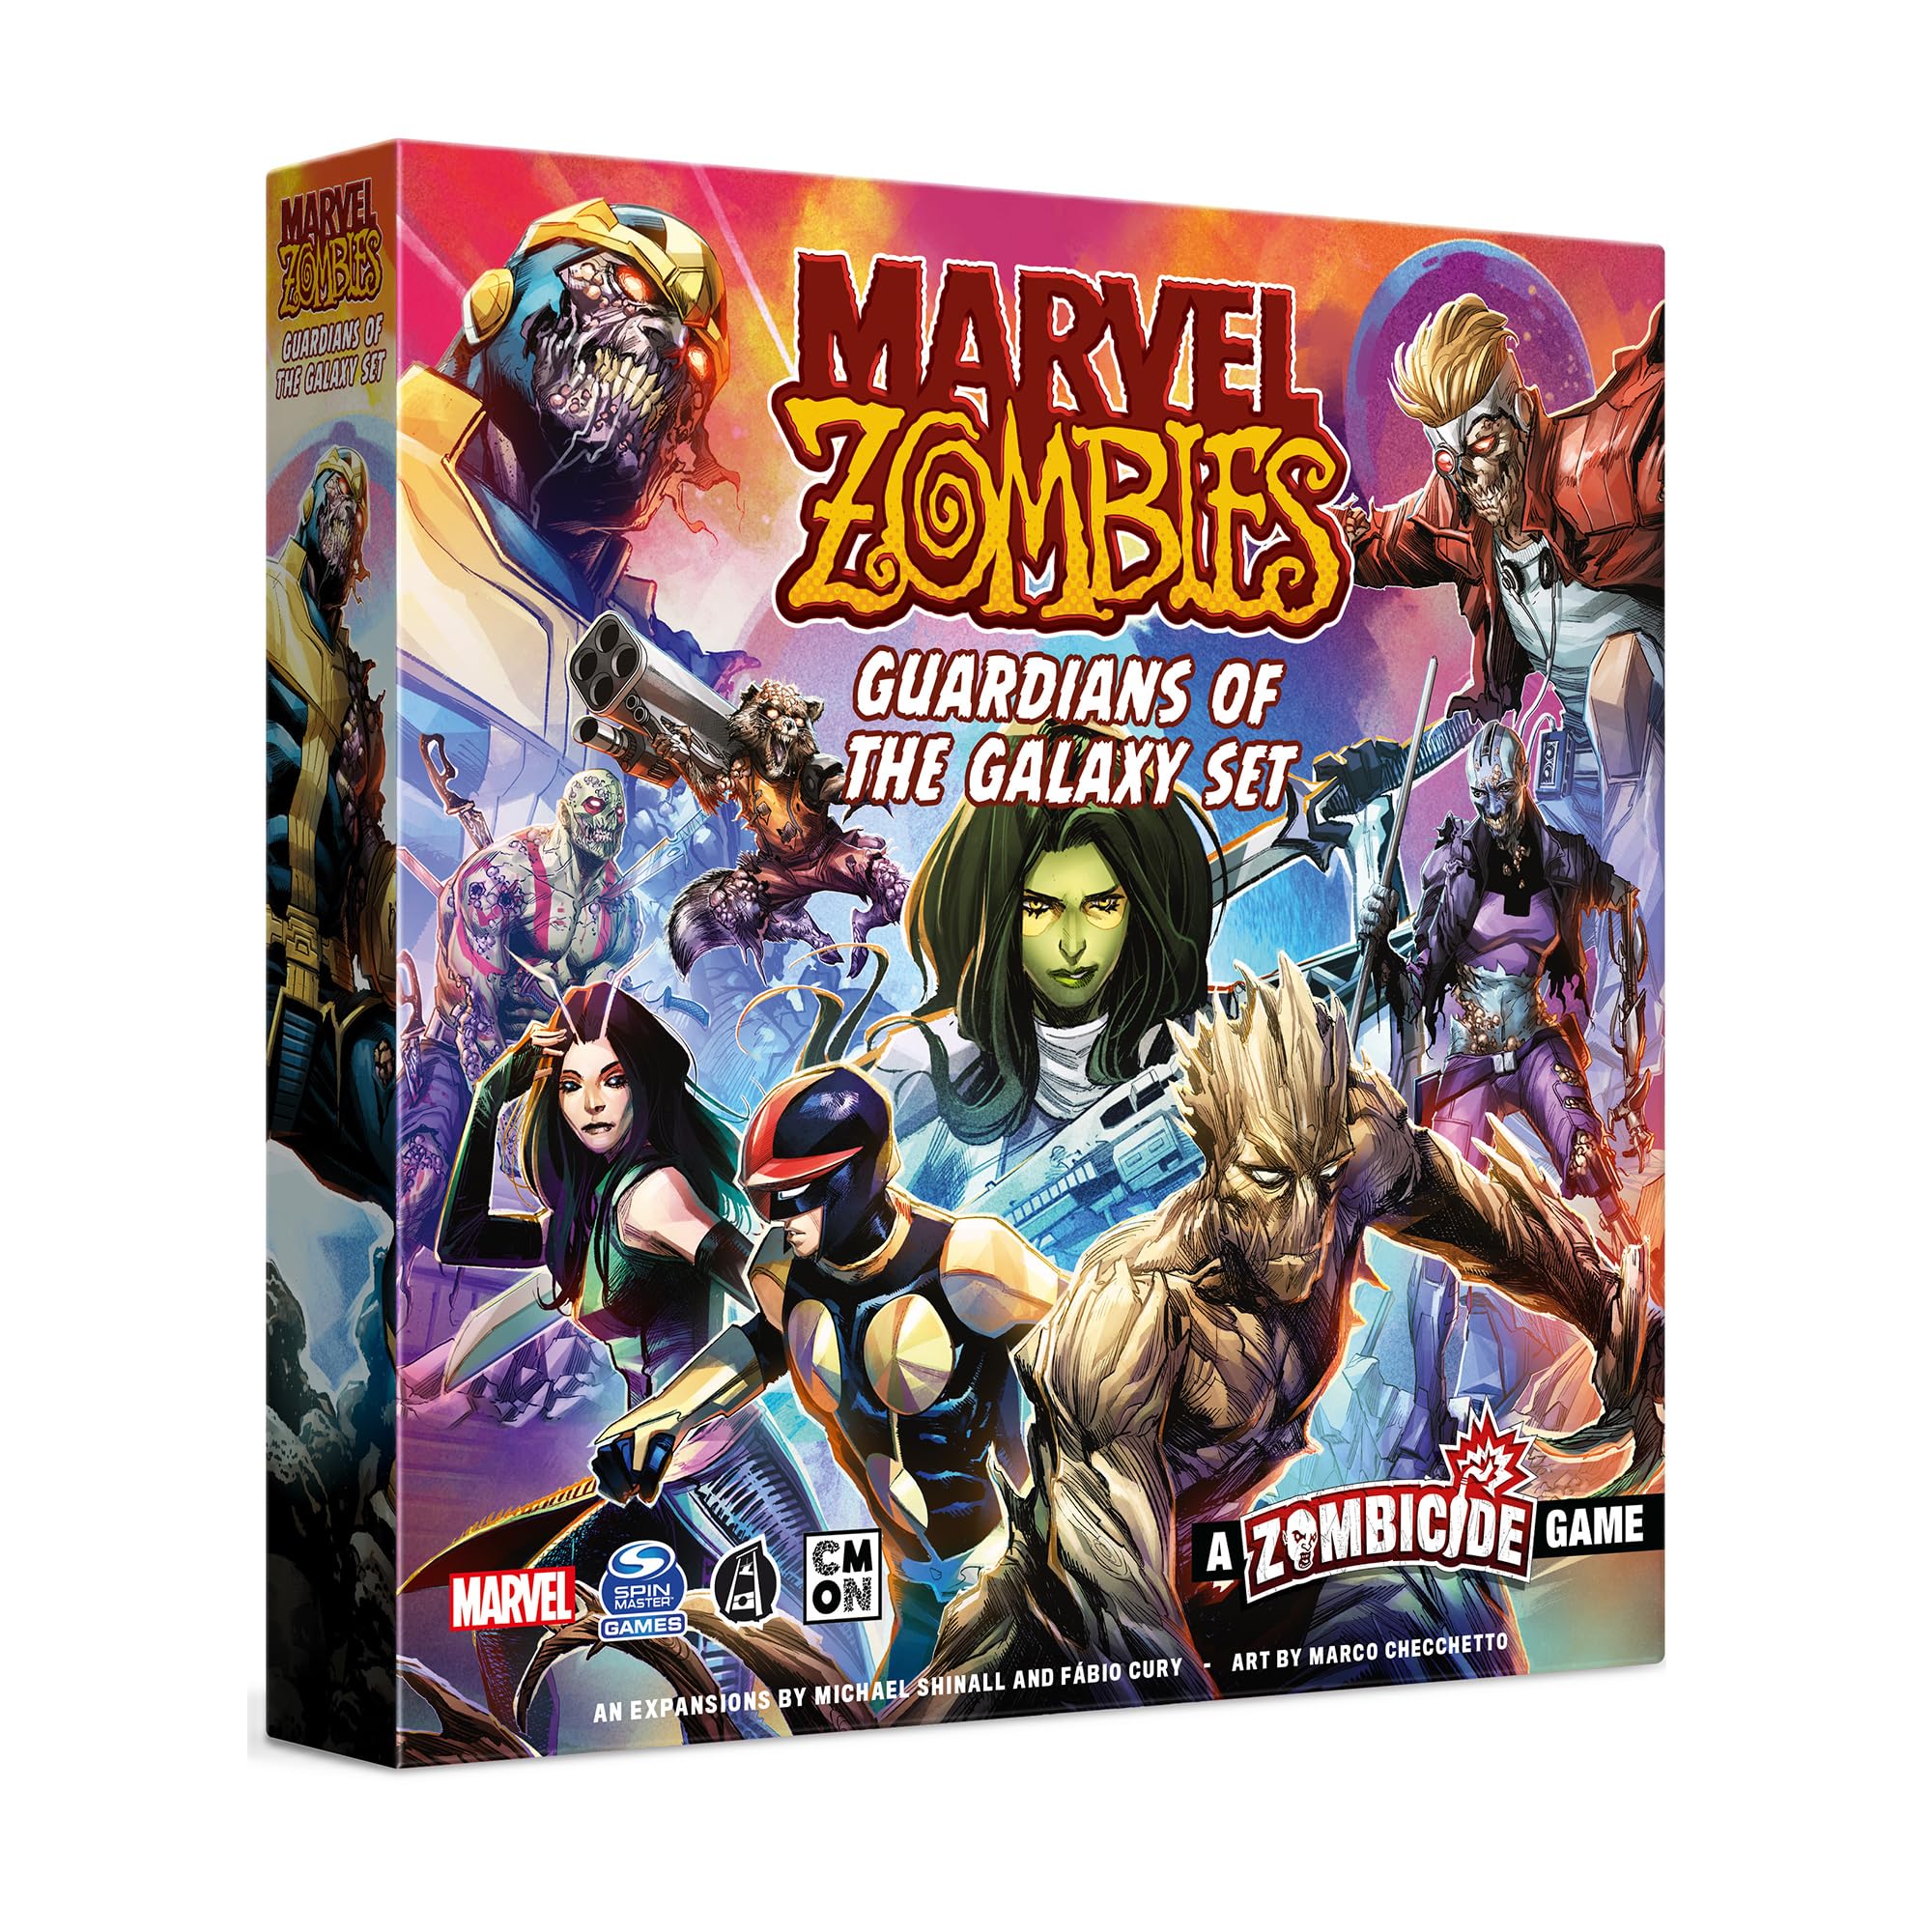 Marvel Zombies Guardians of The Galaxy Expansion - Strategy Board Game, Cooperative Game for Kids and Adults, Zombie Board Game, Ages 14+, 1-6 Players, 90 Minute Playtime, Made by CMON